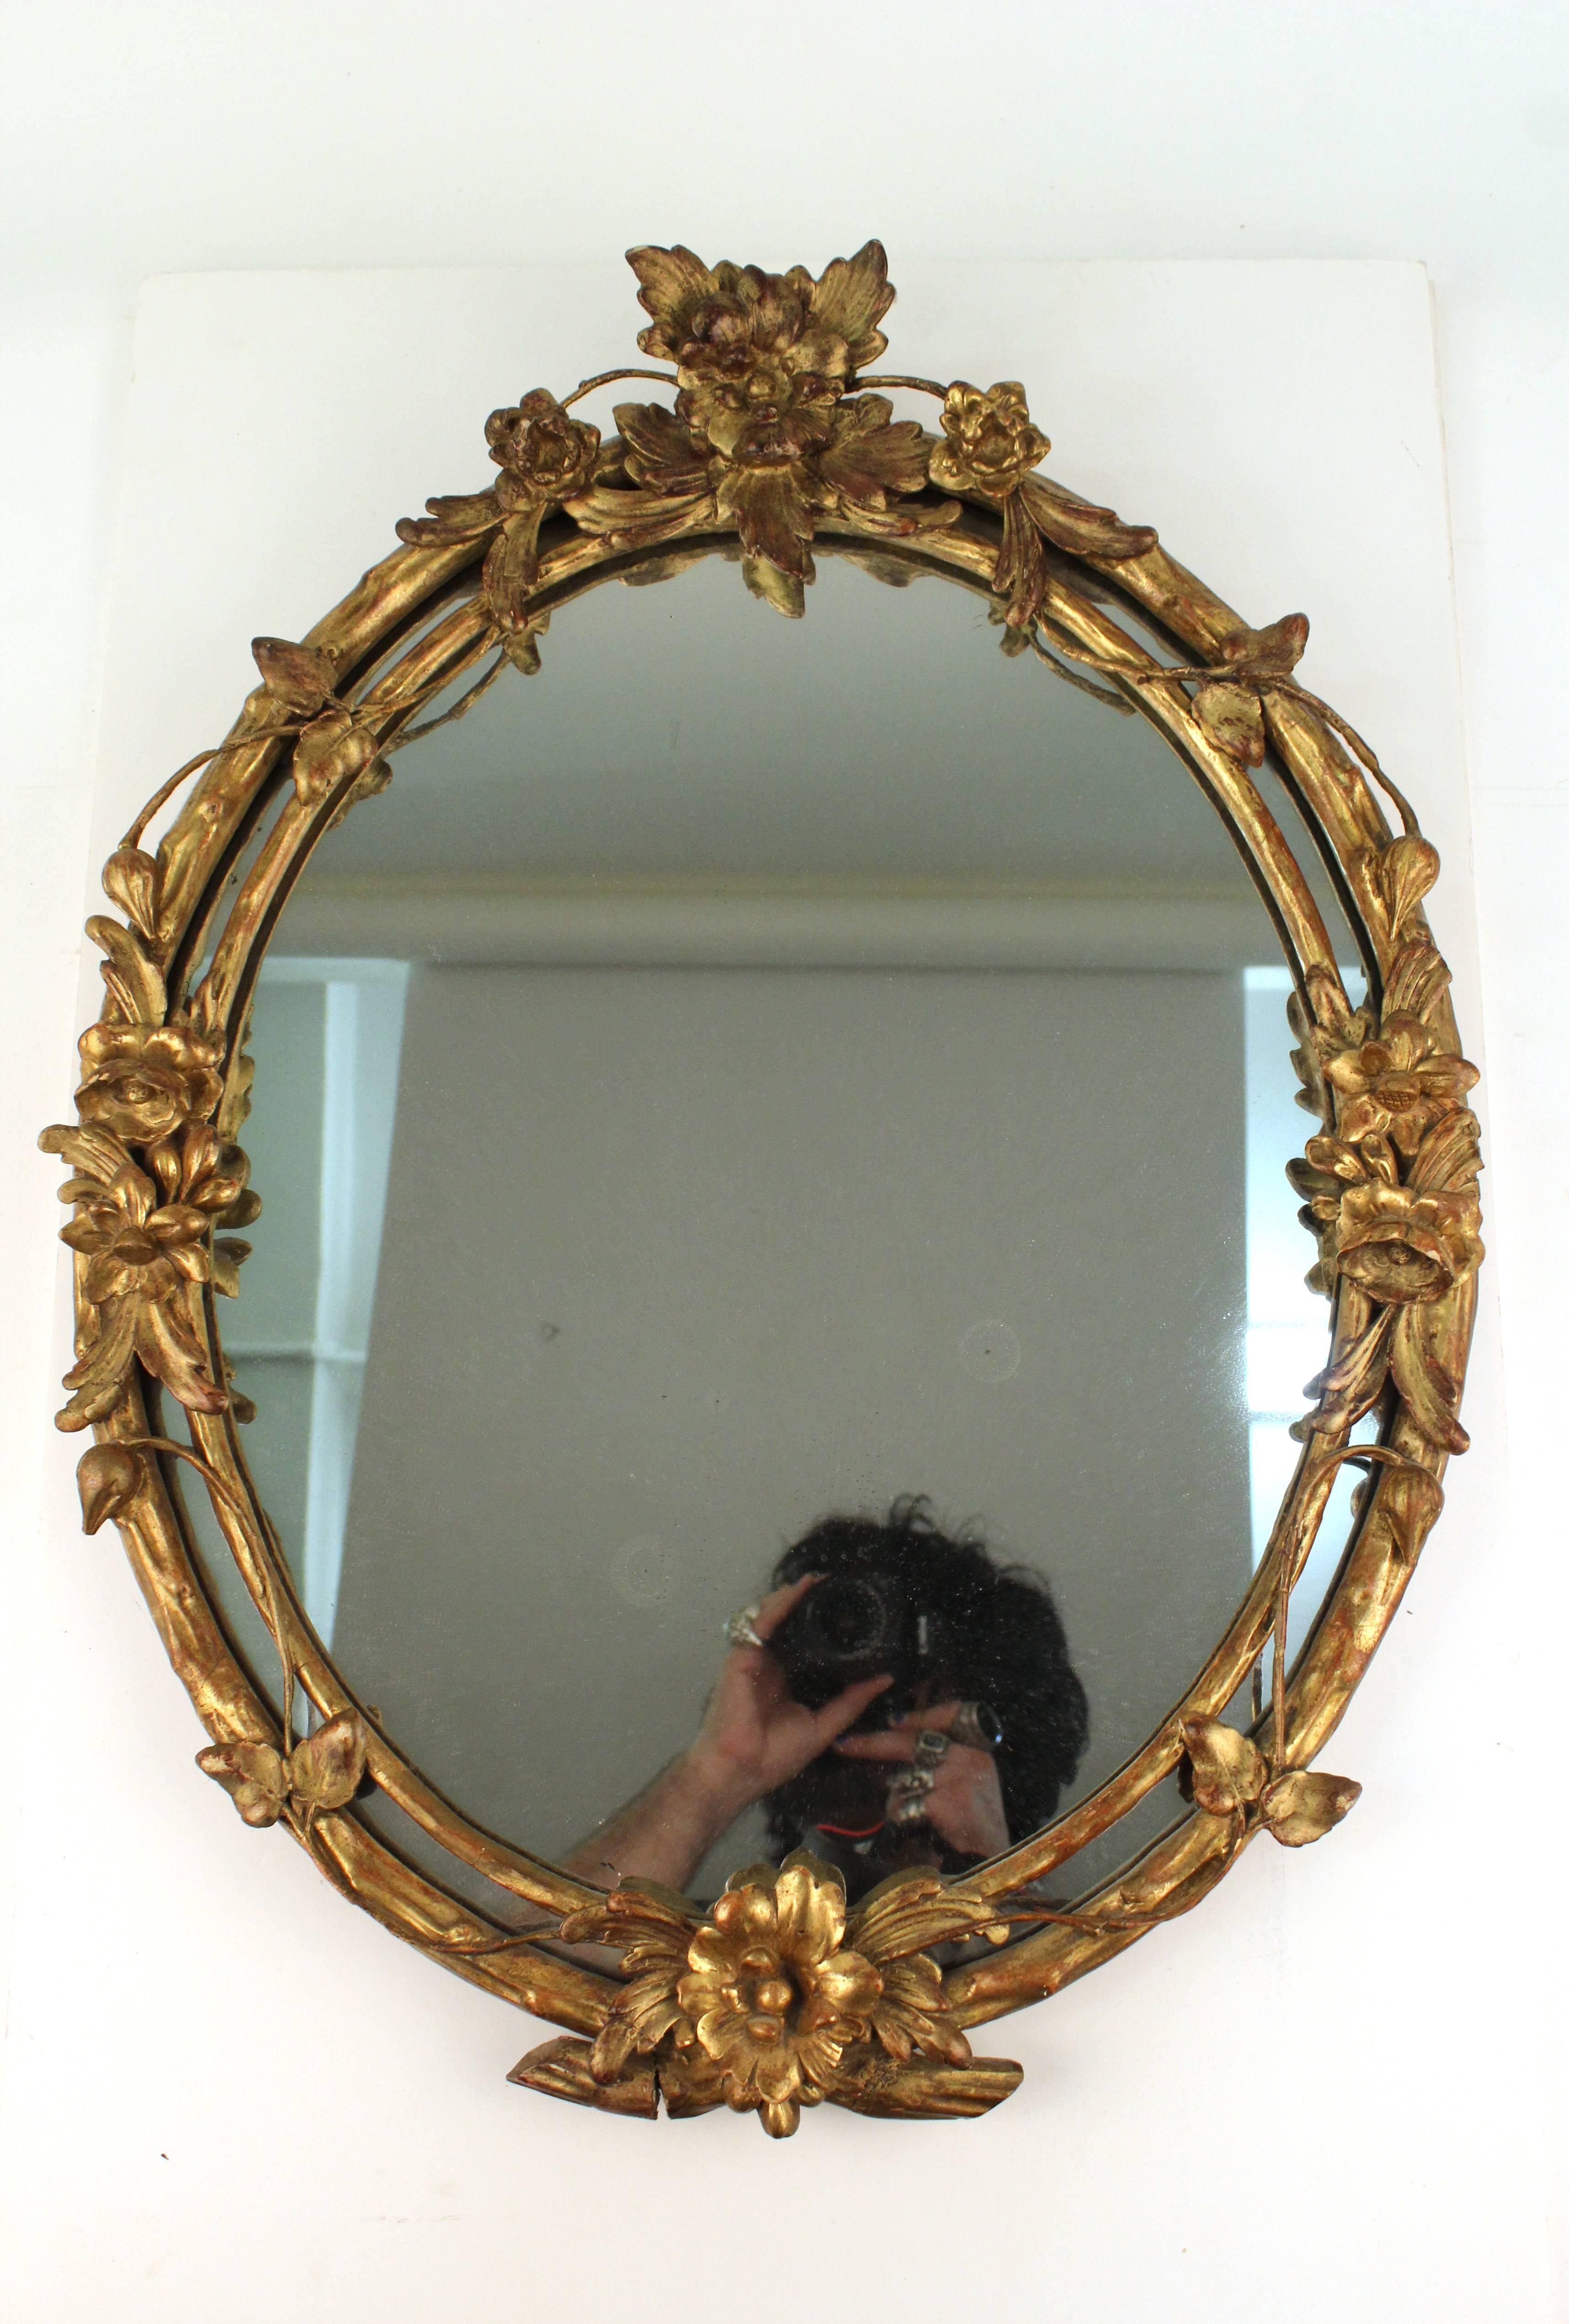 A giltwood mirror in a carved oval frame. Crafted to look like a double frame connected by winding vine with flowers. Includes the original label stating [Made in France]. Some wear appropriate to age and use, namely some chips in the gilt and wear